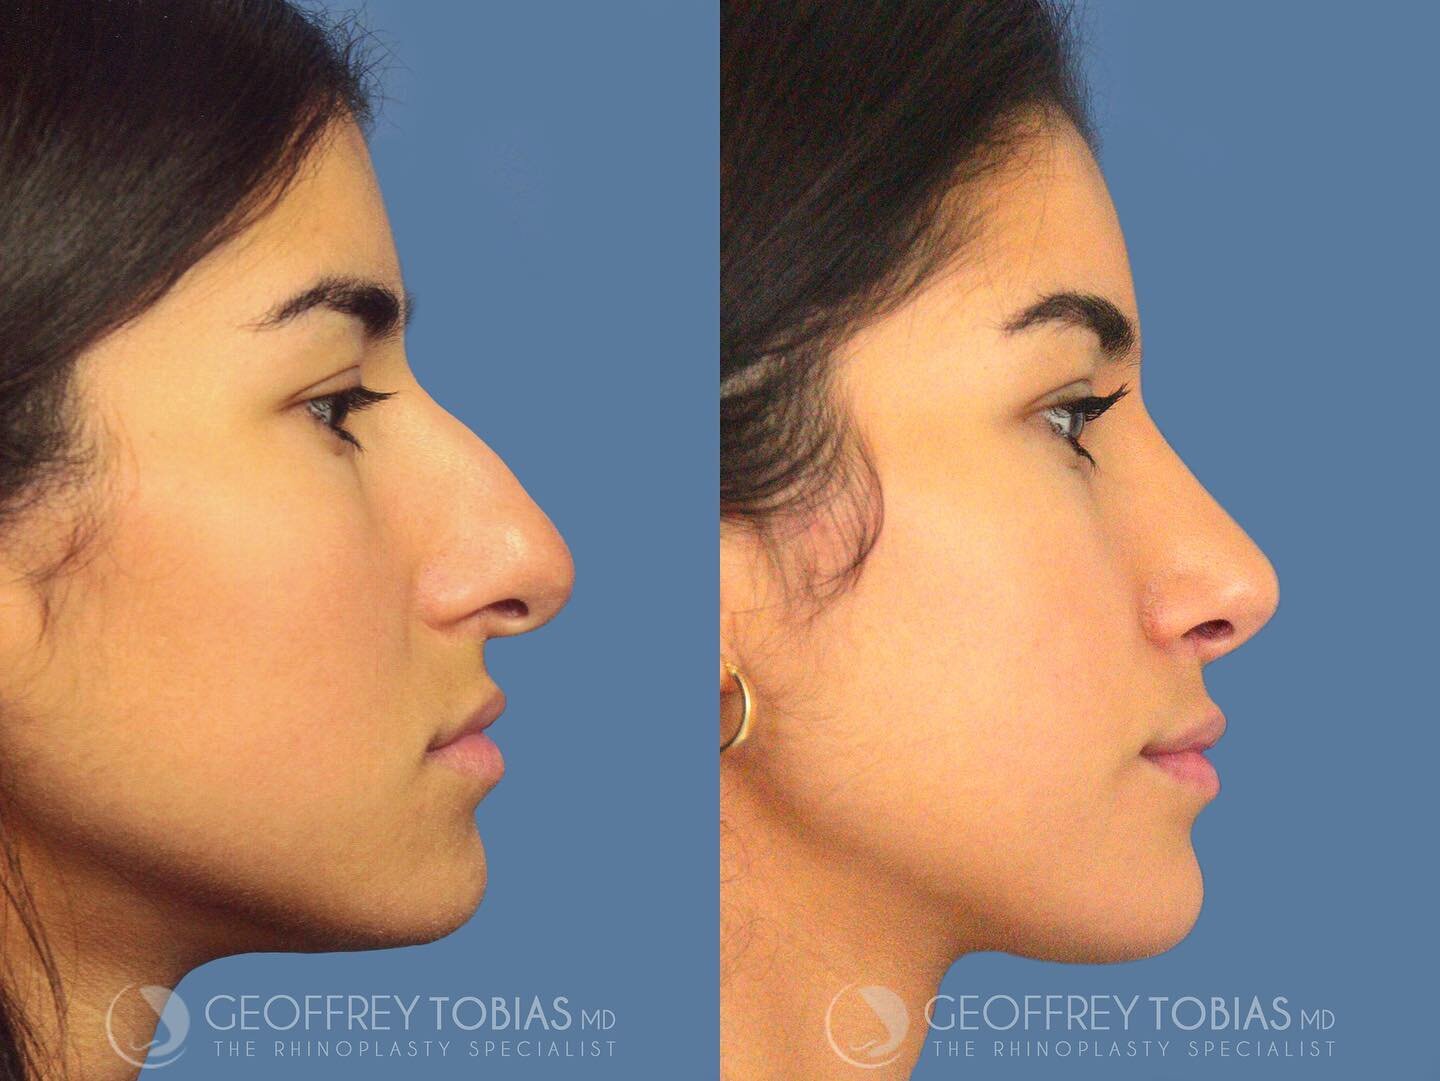 Saved under: profile goals ⚡️
#contouredbyTobias 👃🏼
.
.
.
Time: 2.5 hours
Treatment: Closed Rhinoplasty = 🚫 NO SCARS
Downtime: Rapid recovery! 4-7 days until you can return to work/school 
Results: Immediate! Final results achieved in 6-12 months
